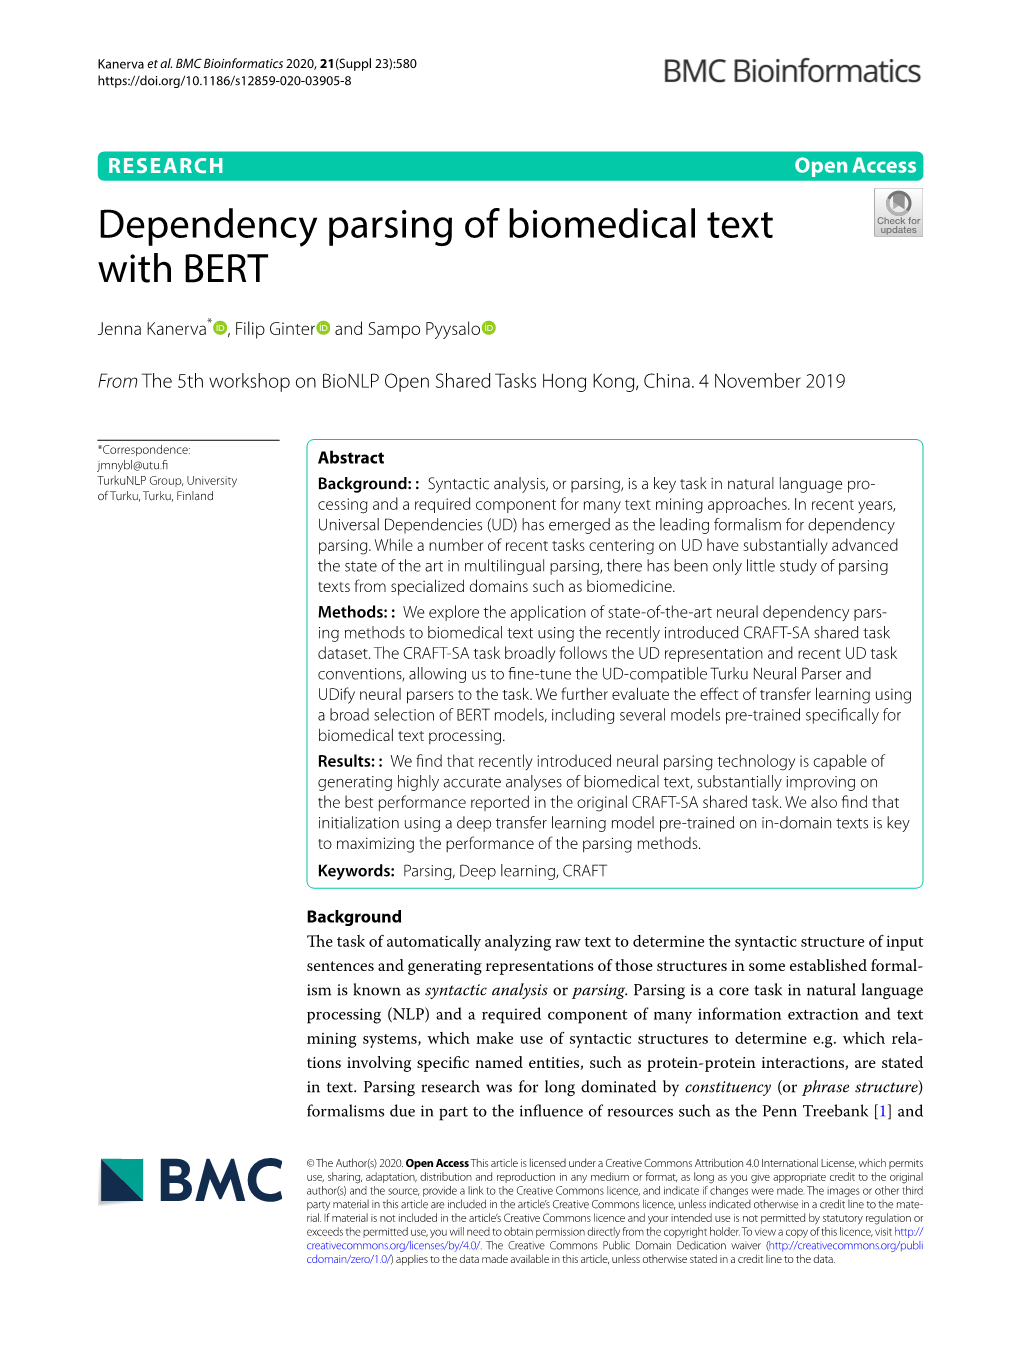 Dependency Parsing of Biomedical Text with BERT